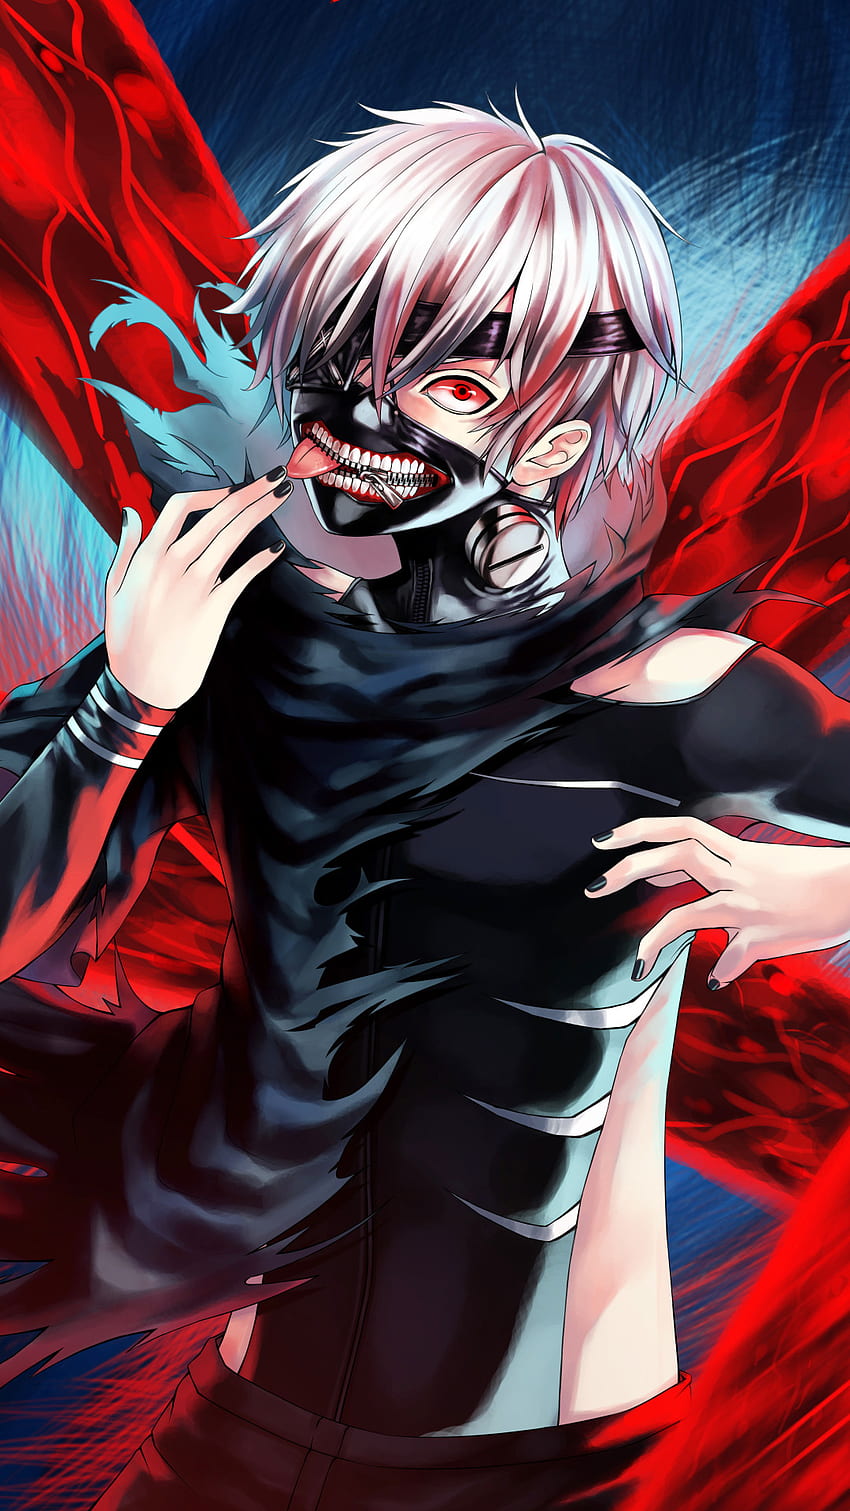 Tokyo Ghoul Wallpapers and Backgrounds - WallpaperCG